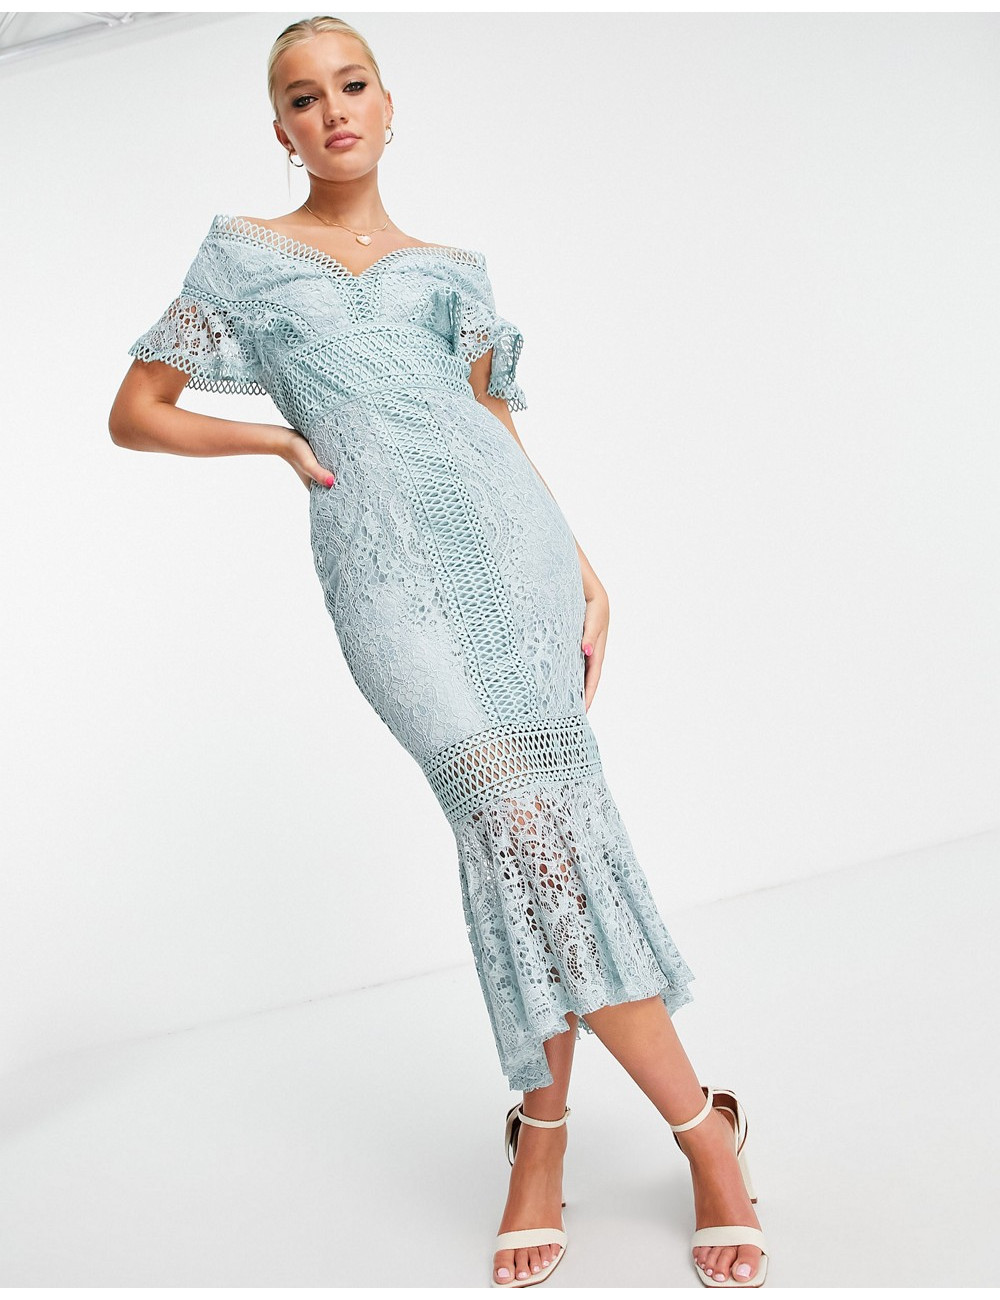 ASOS DESIGN Lace Dress with...